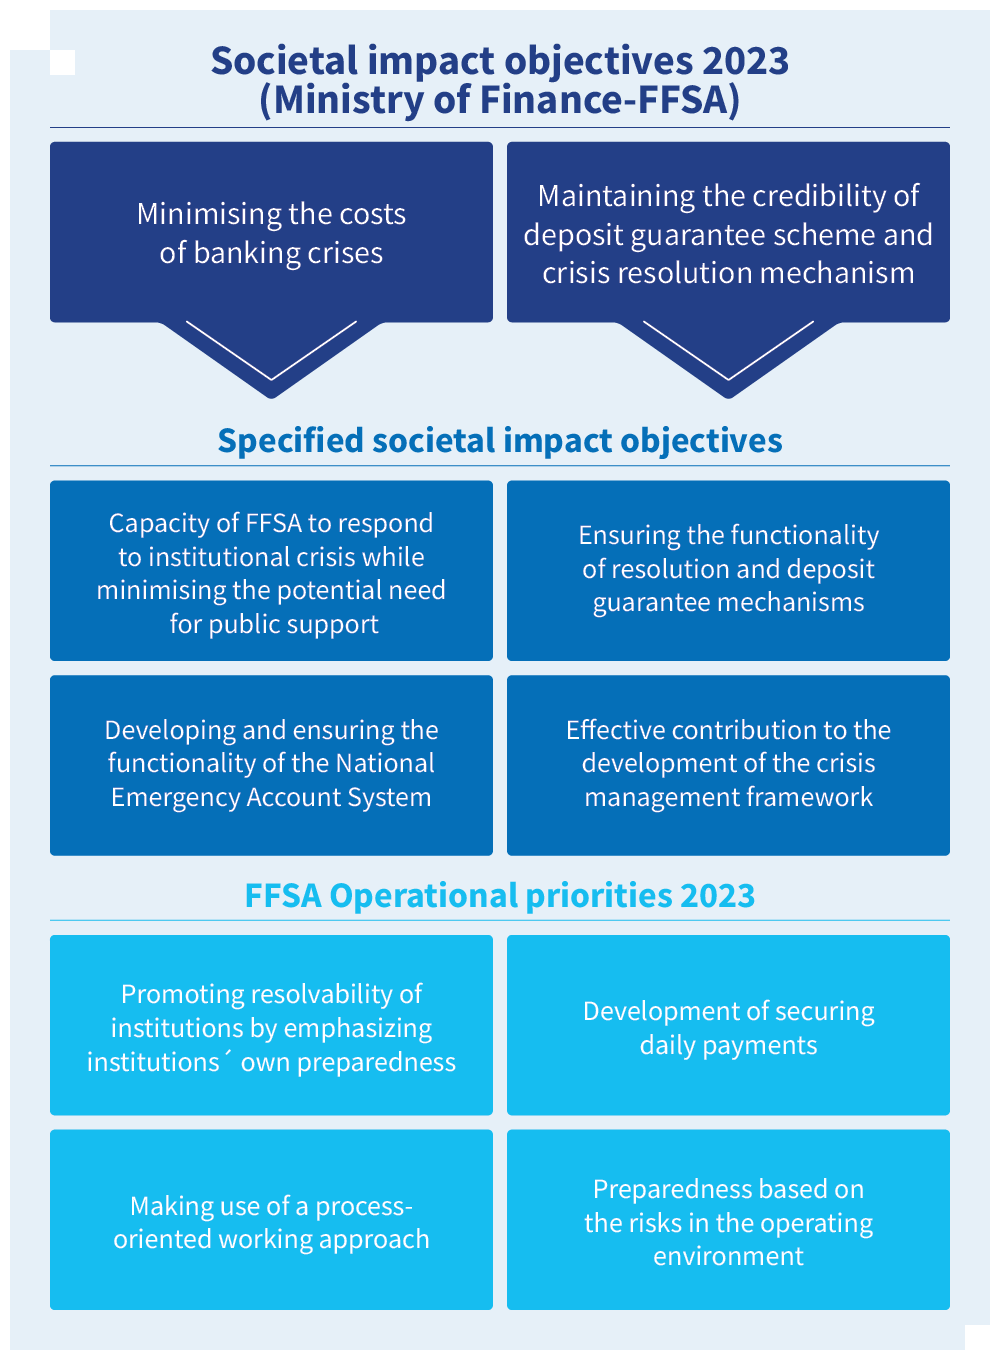 FFSA societal impact objectives 2023 (Ministry of Finance-FFSA), specified societal impact objectives and FFSA operational priorities 2023.